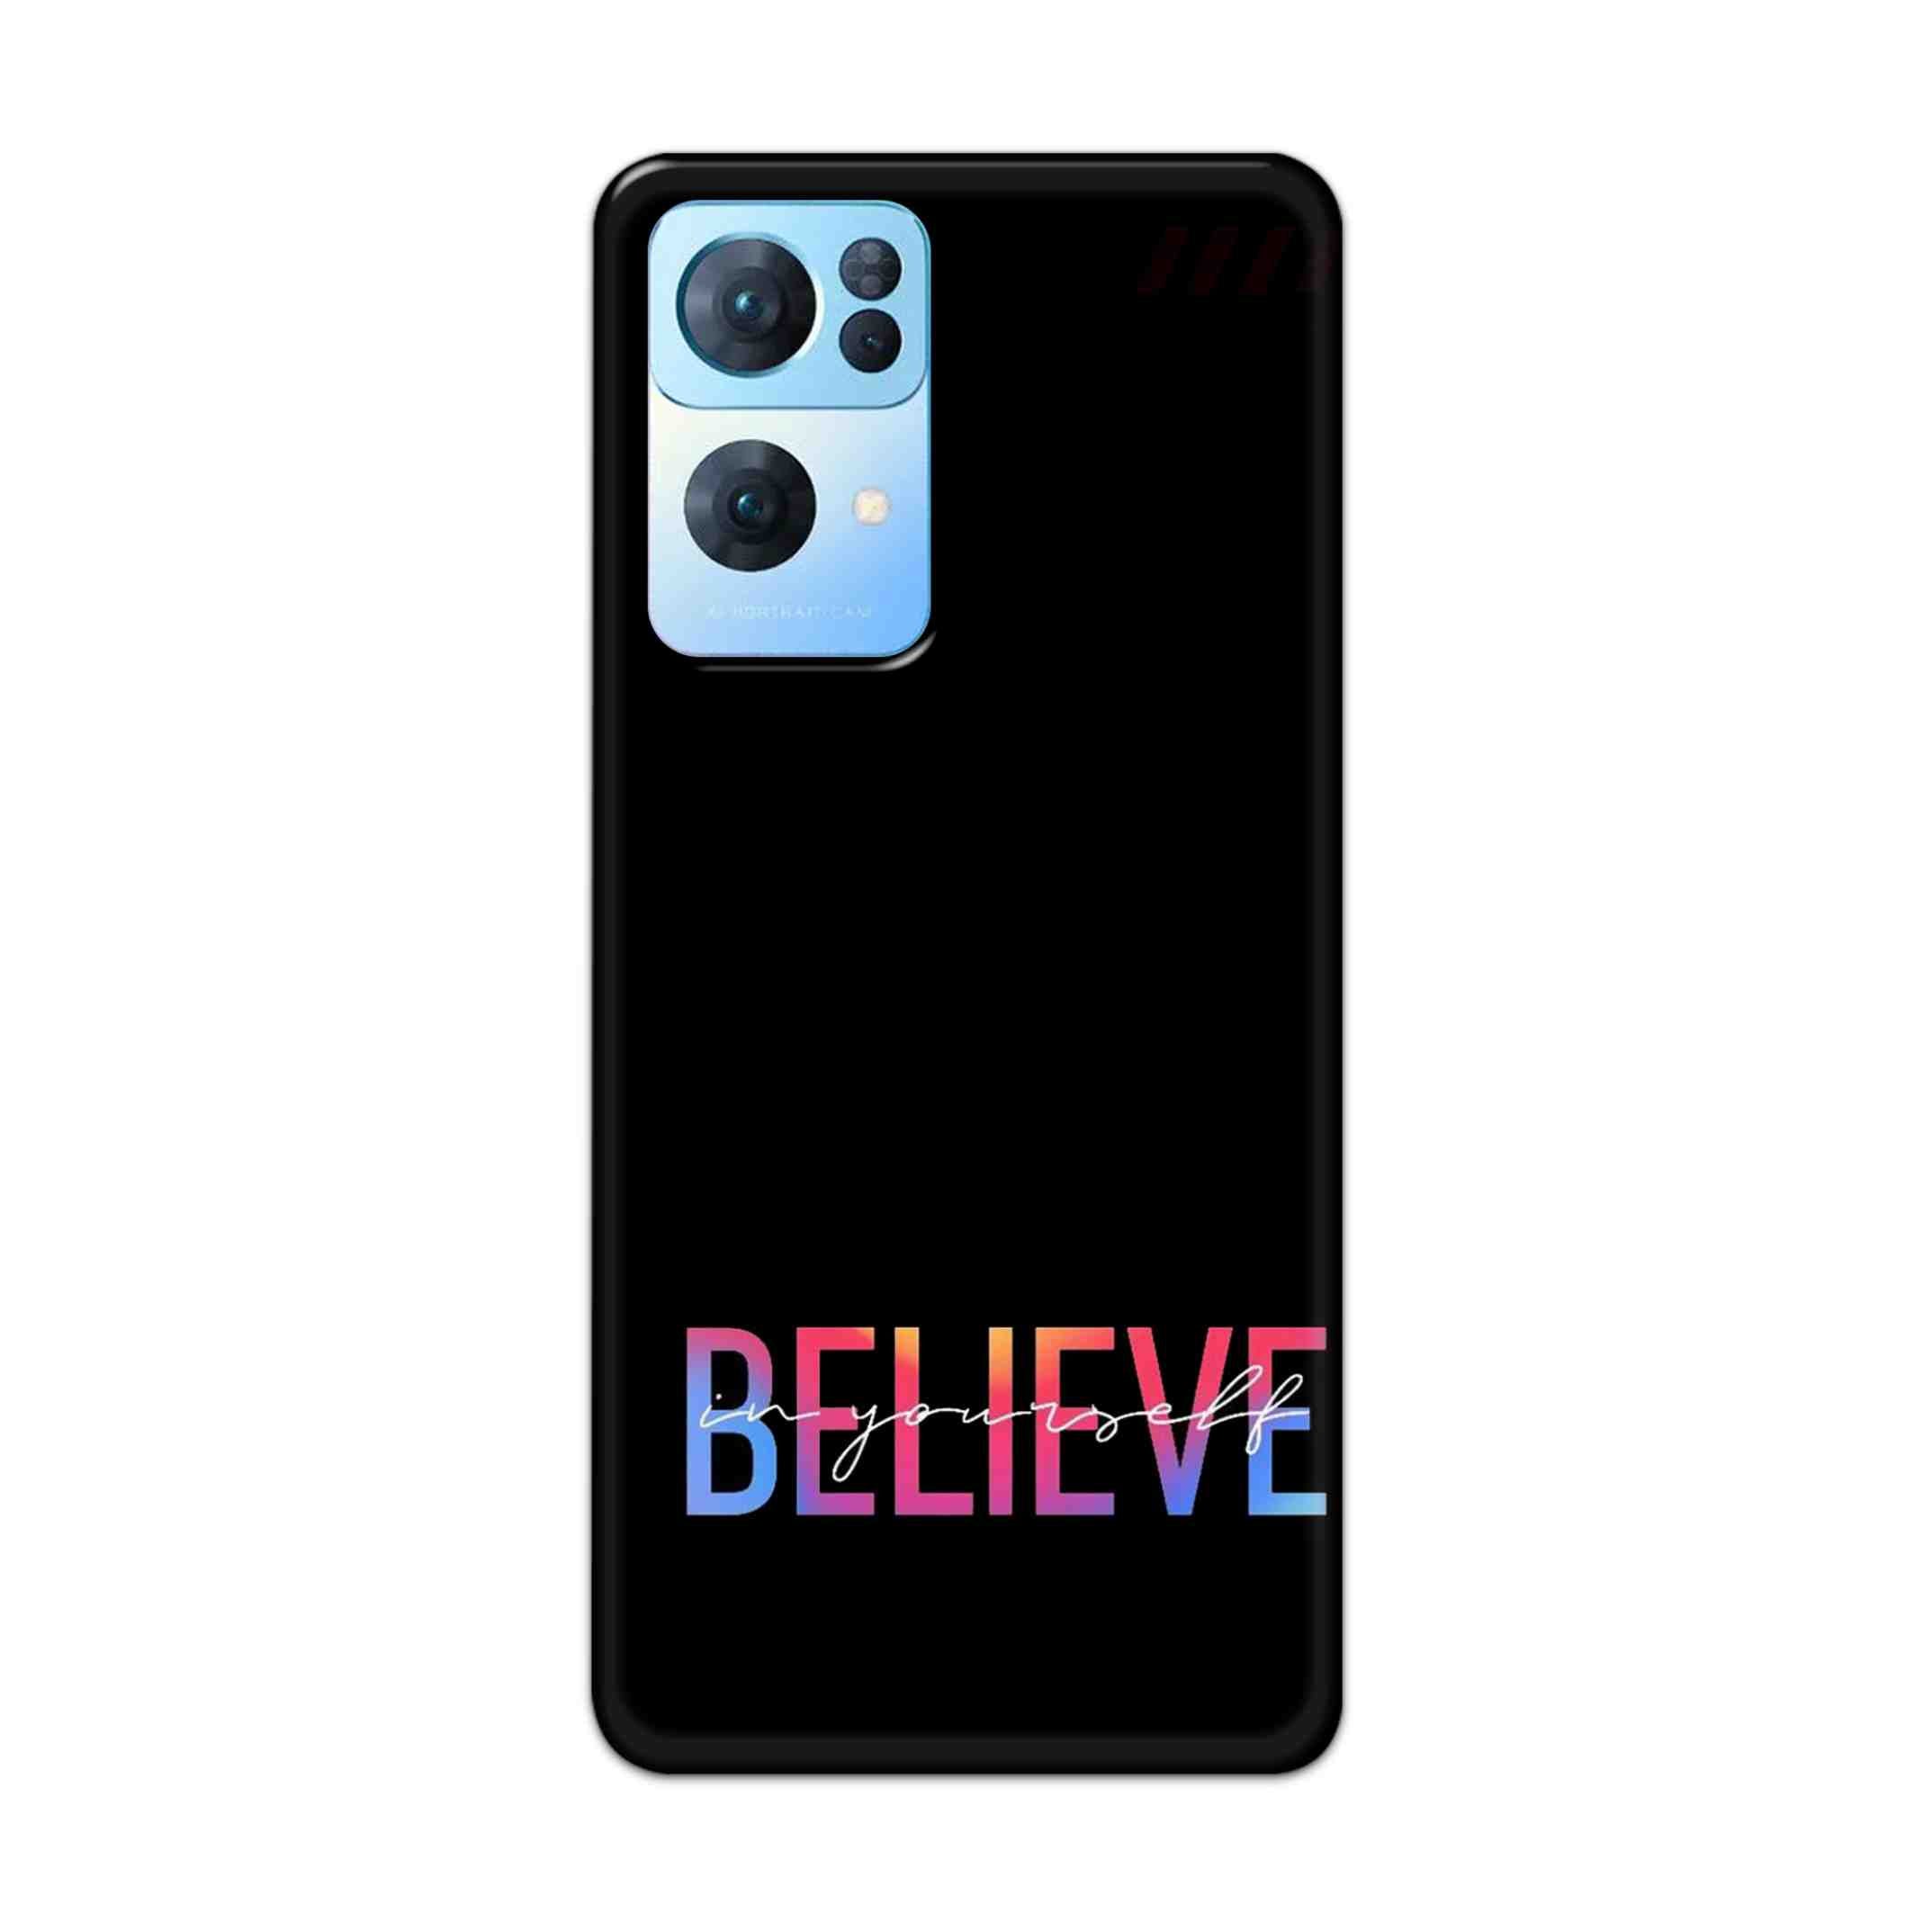 Buy Believe Hard Back Mobile Phone Case Cover For Oppo Reno 7 Pro Online